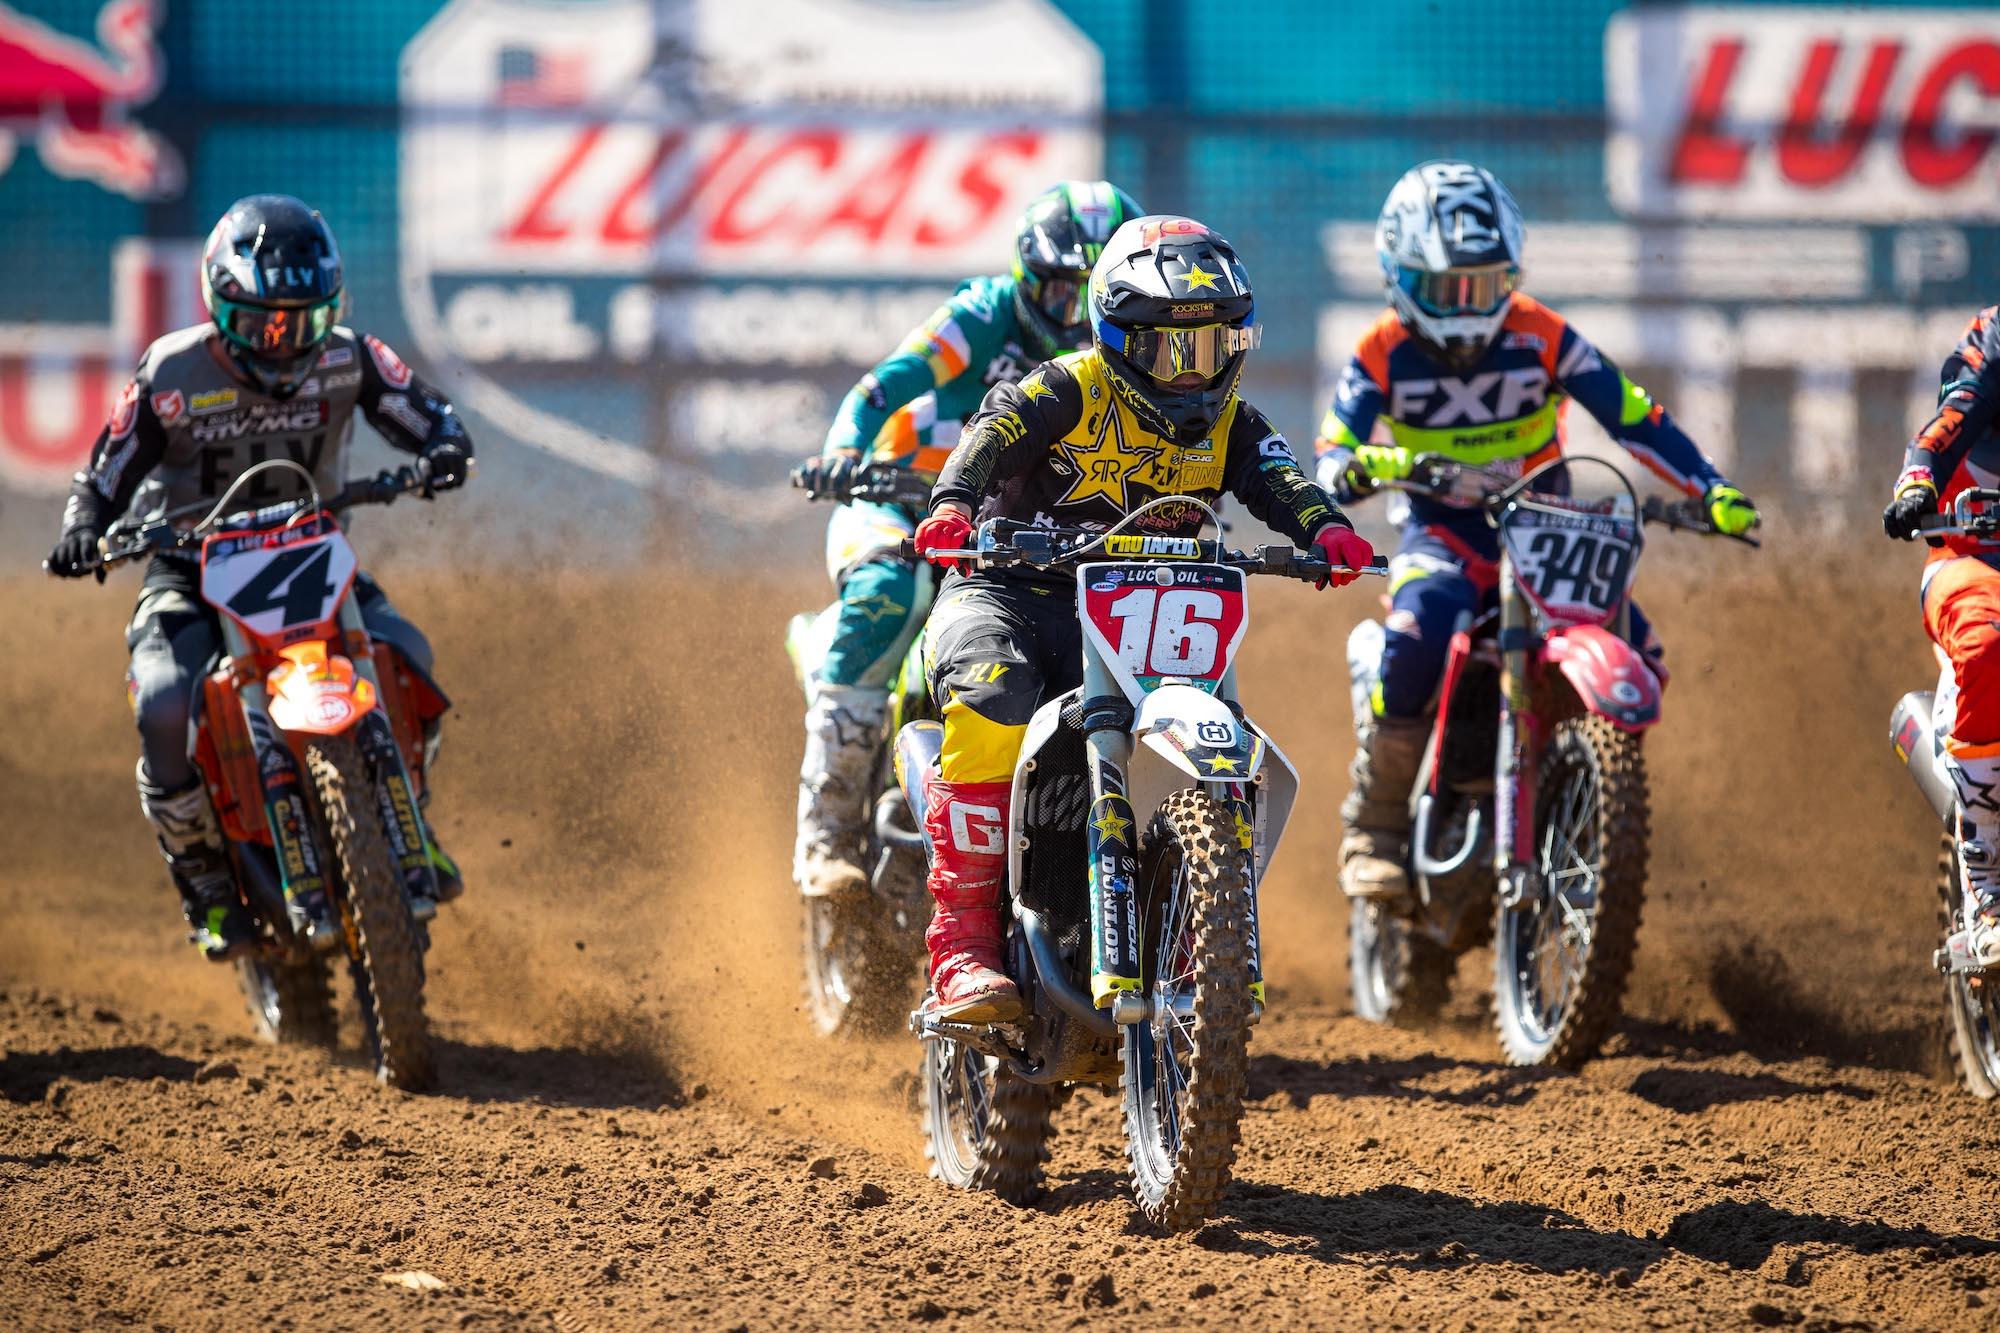 The 2021 Lucas Oil Pro Motocross Championship will see Zach Osborne (16) look to successfully defend his 450 Class title.